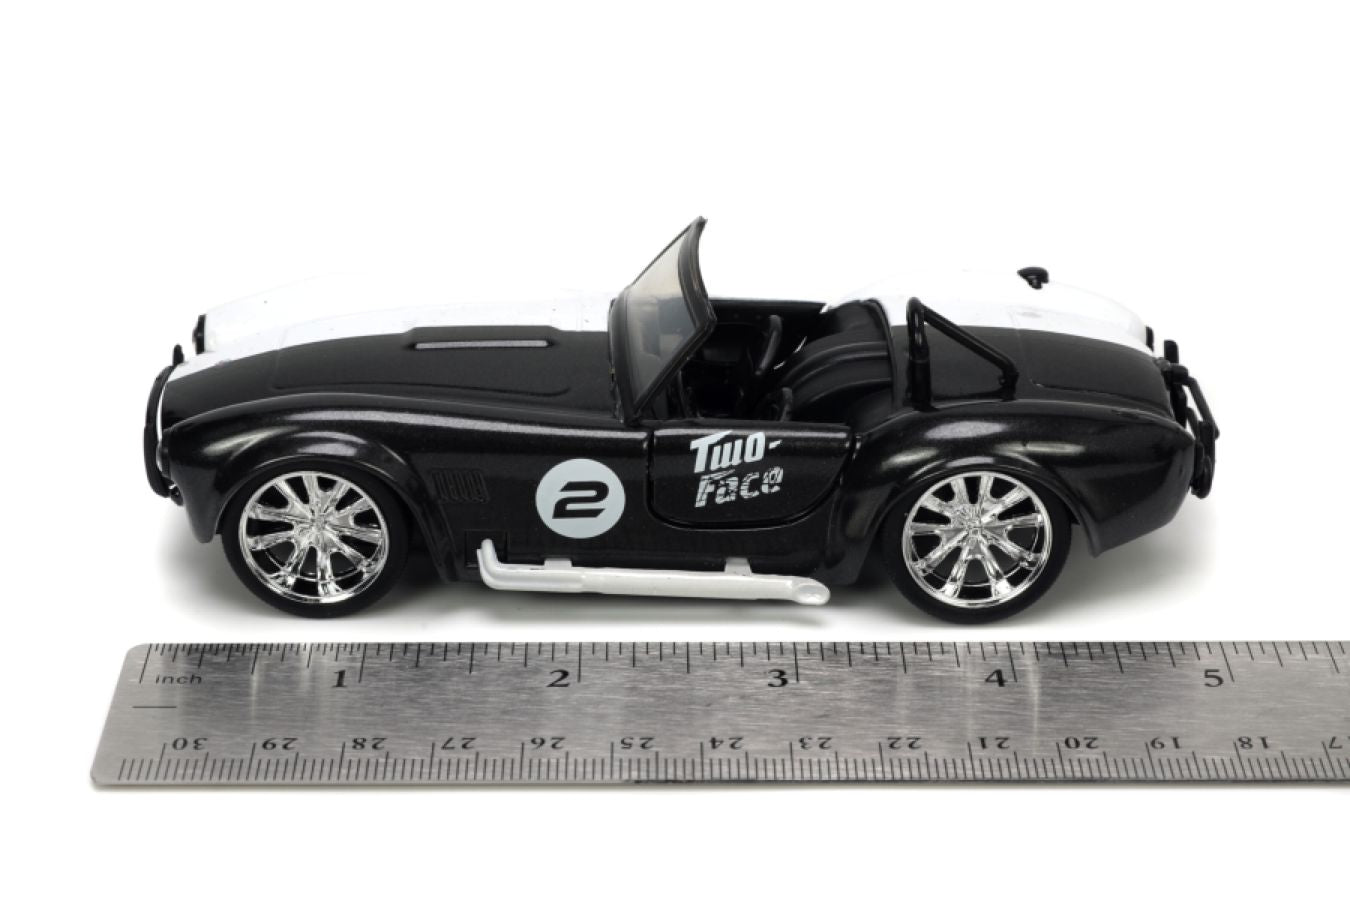 Batman (comics) - 1965 Shelby Cobra with Two-Face Figure 1:32 Scale